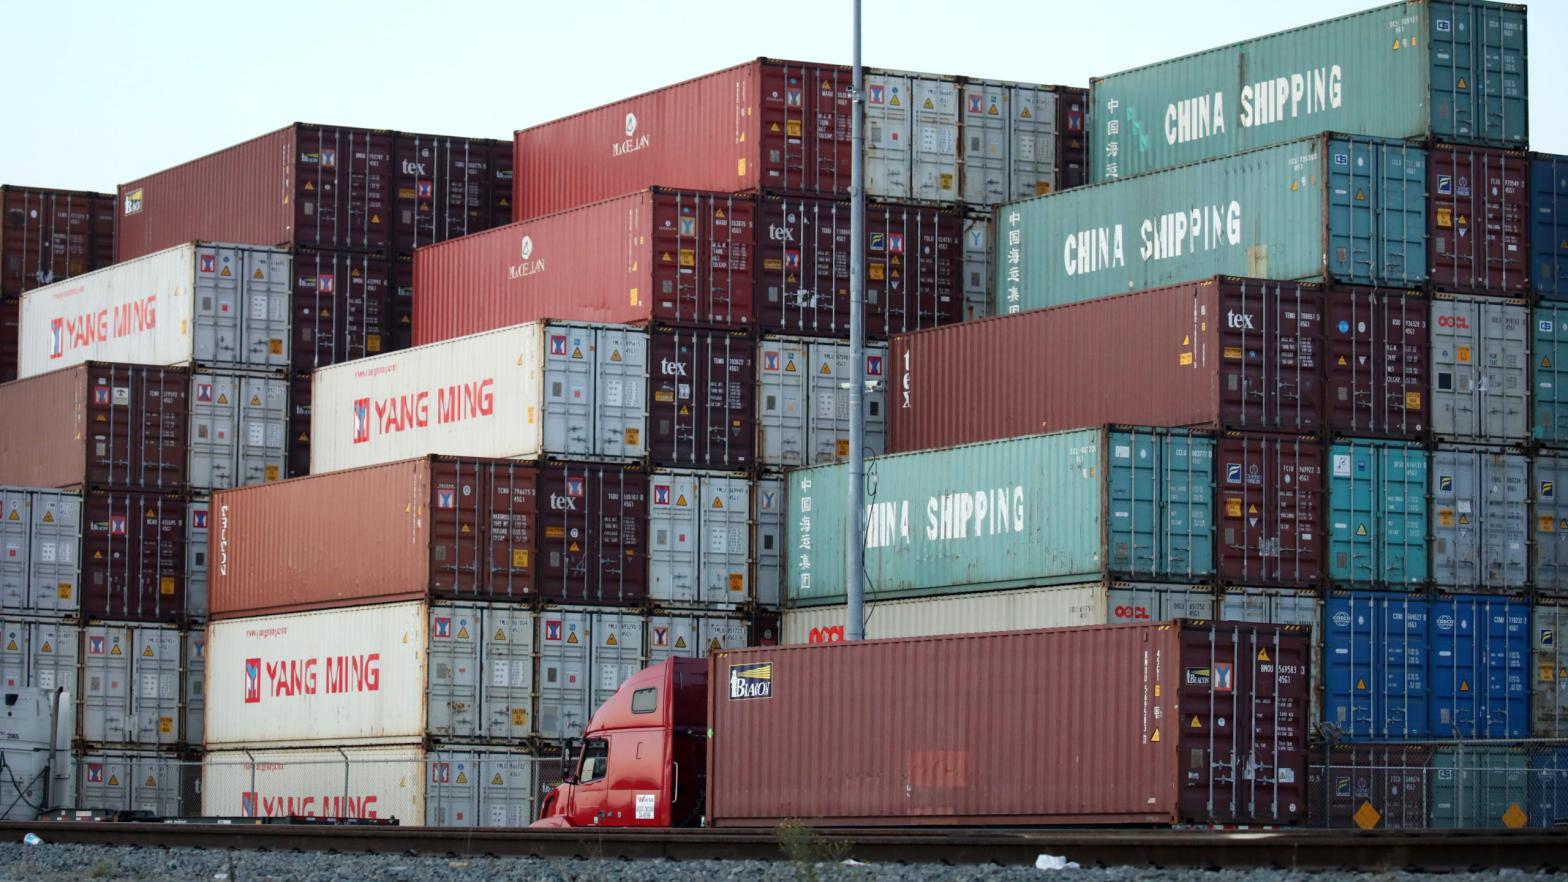 Shipping containers are stacked at the Port of Los Angeles, the nation's busiest container port, on November 7, 2019 in San Pedro, California. (Photo: Mario Tama, Getty Images)